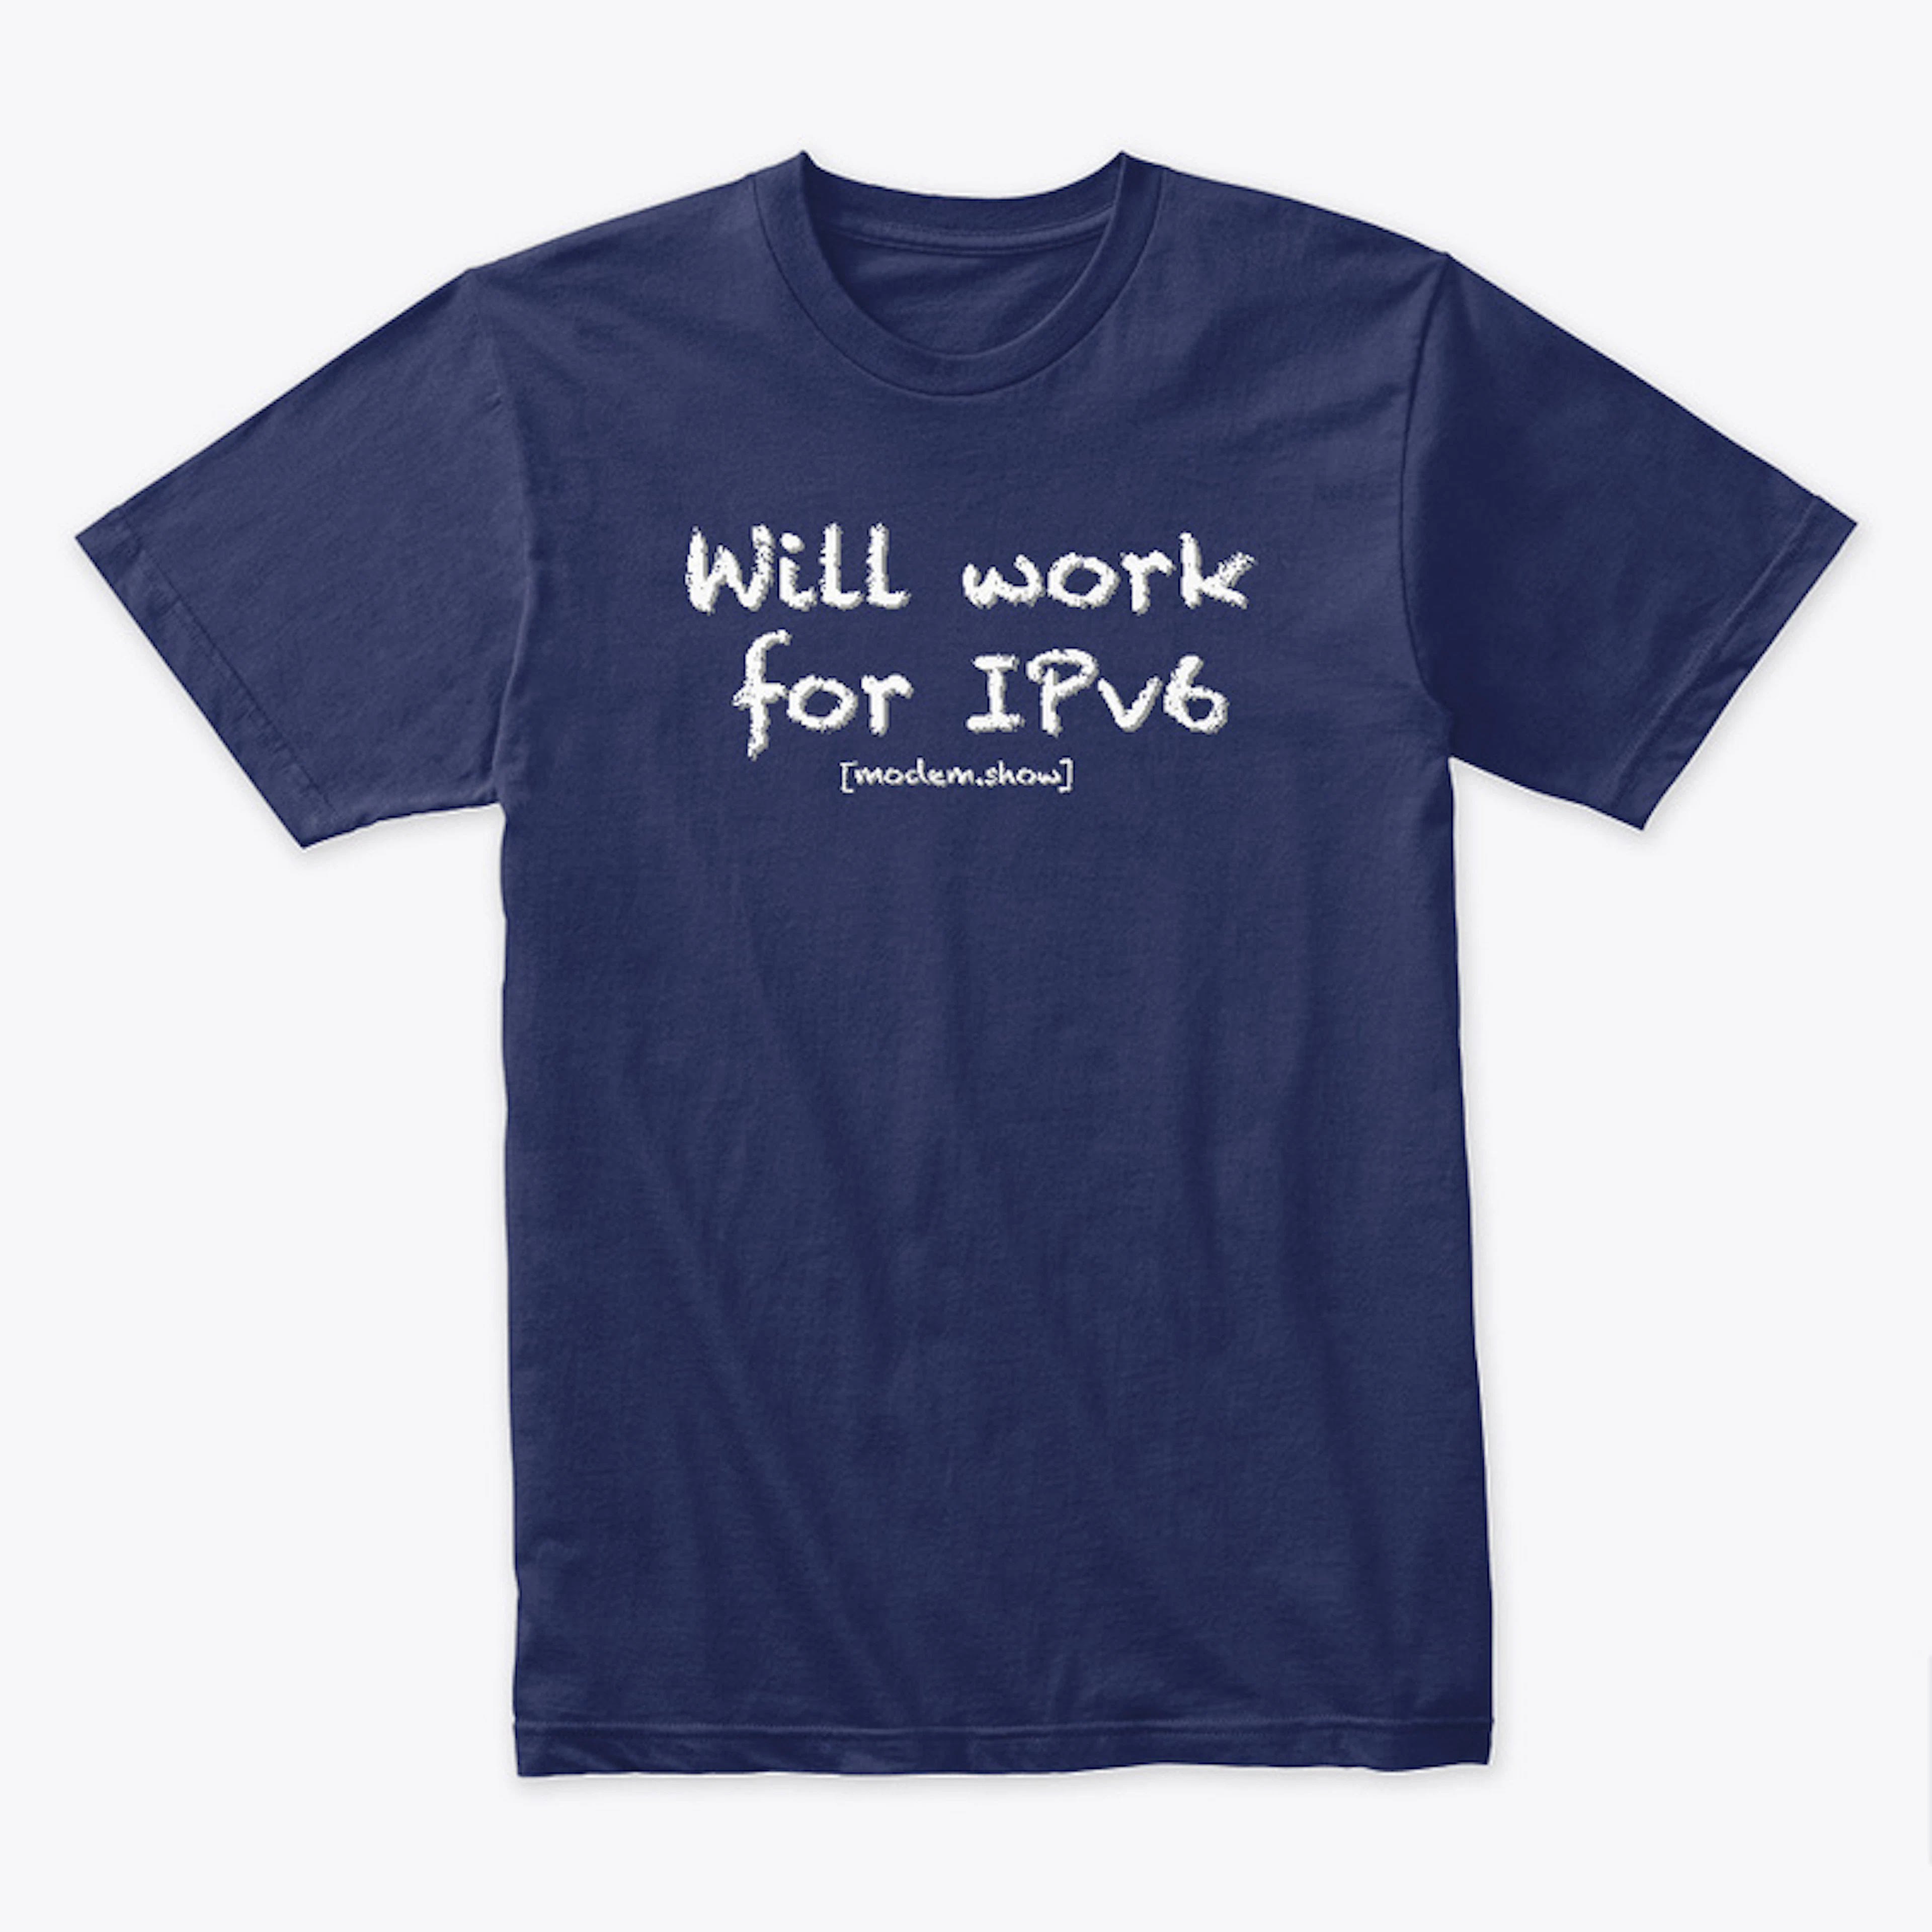 Will work for IPv6